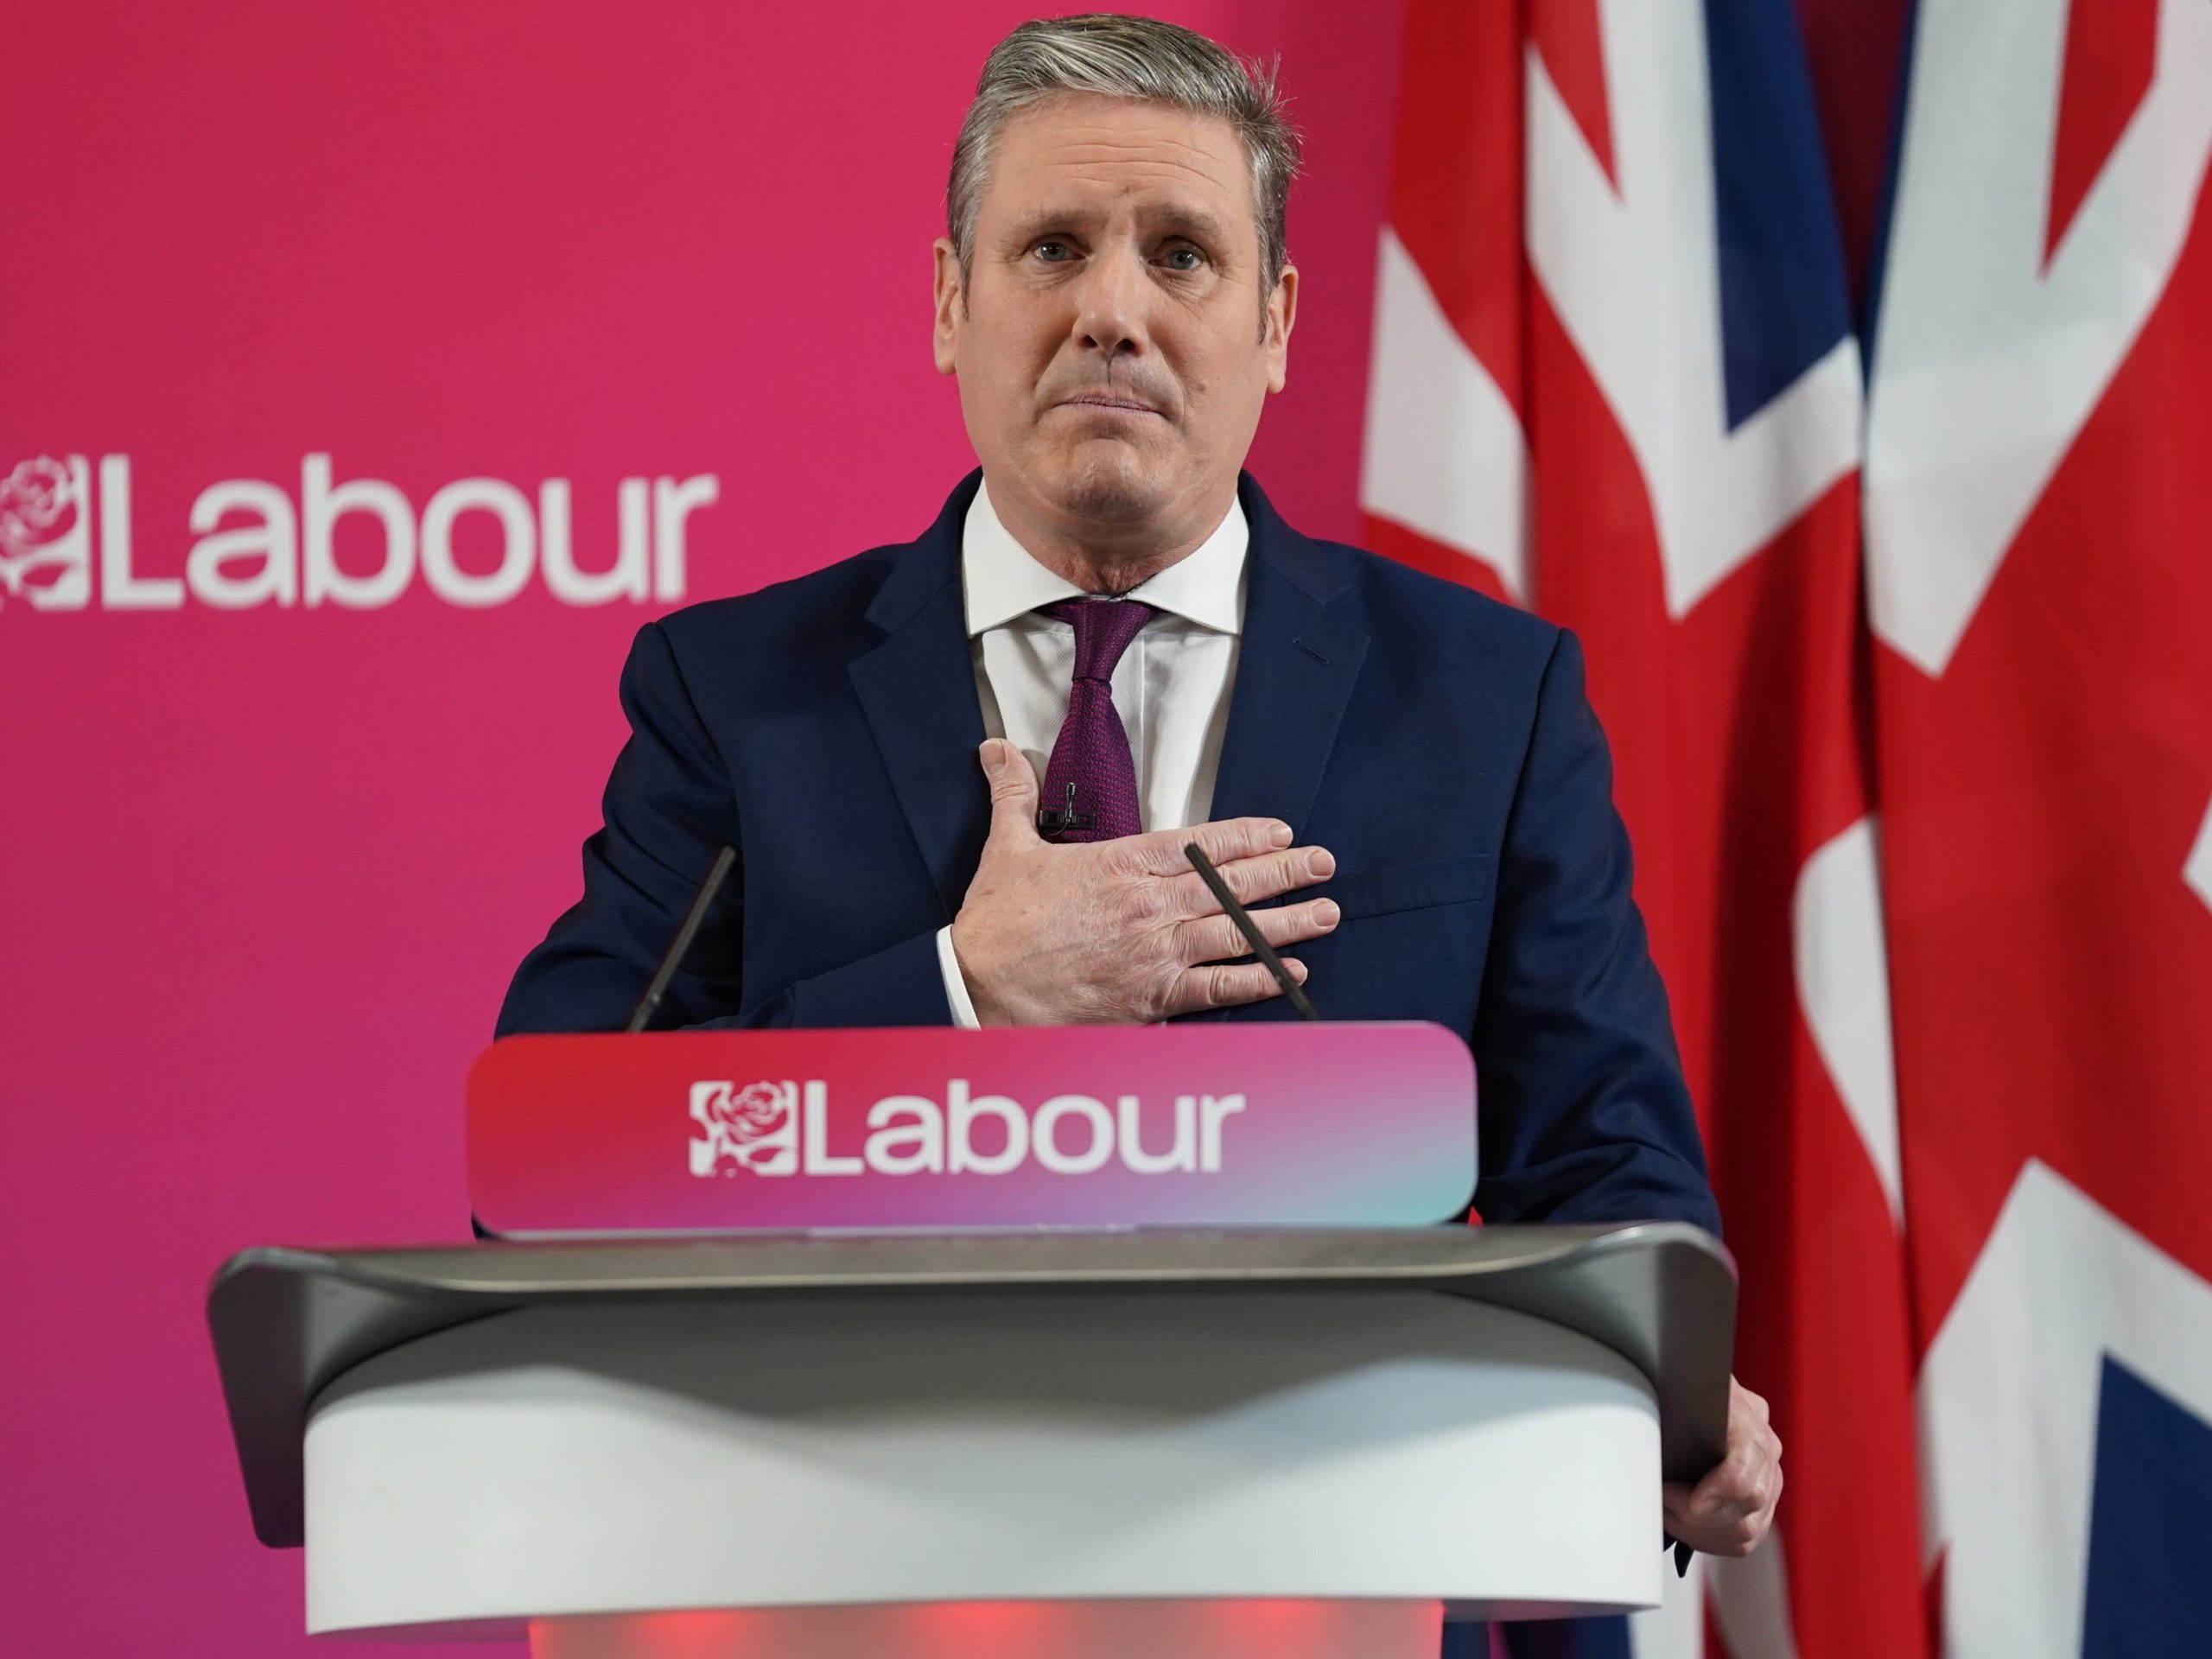 Keir Starmer speech: Everything the Labour leader said in his New Year’s message